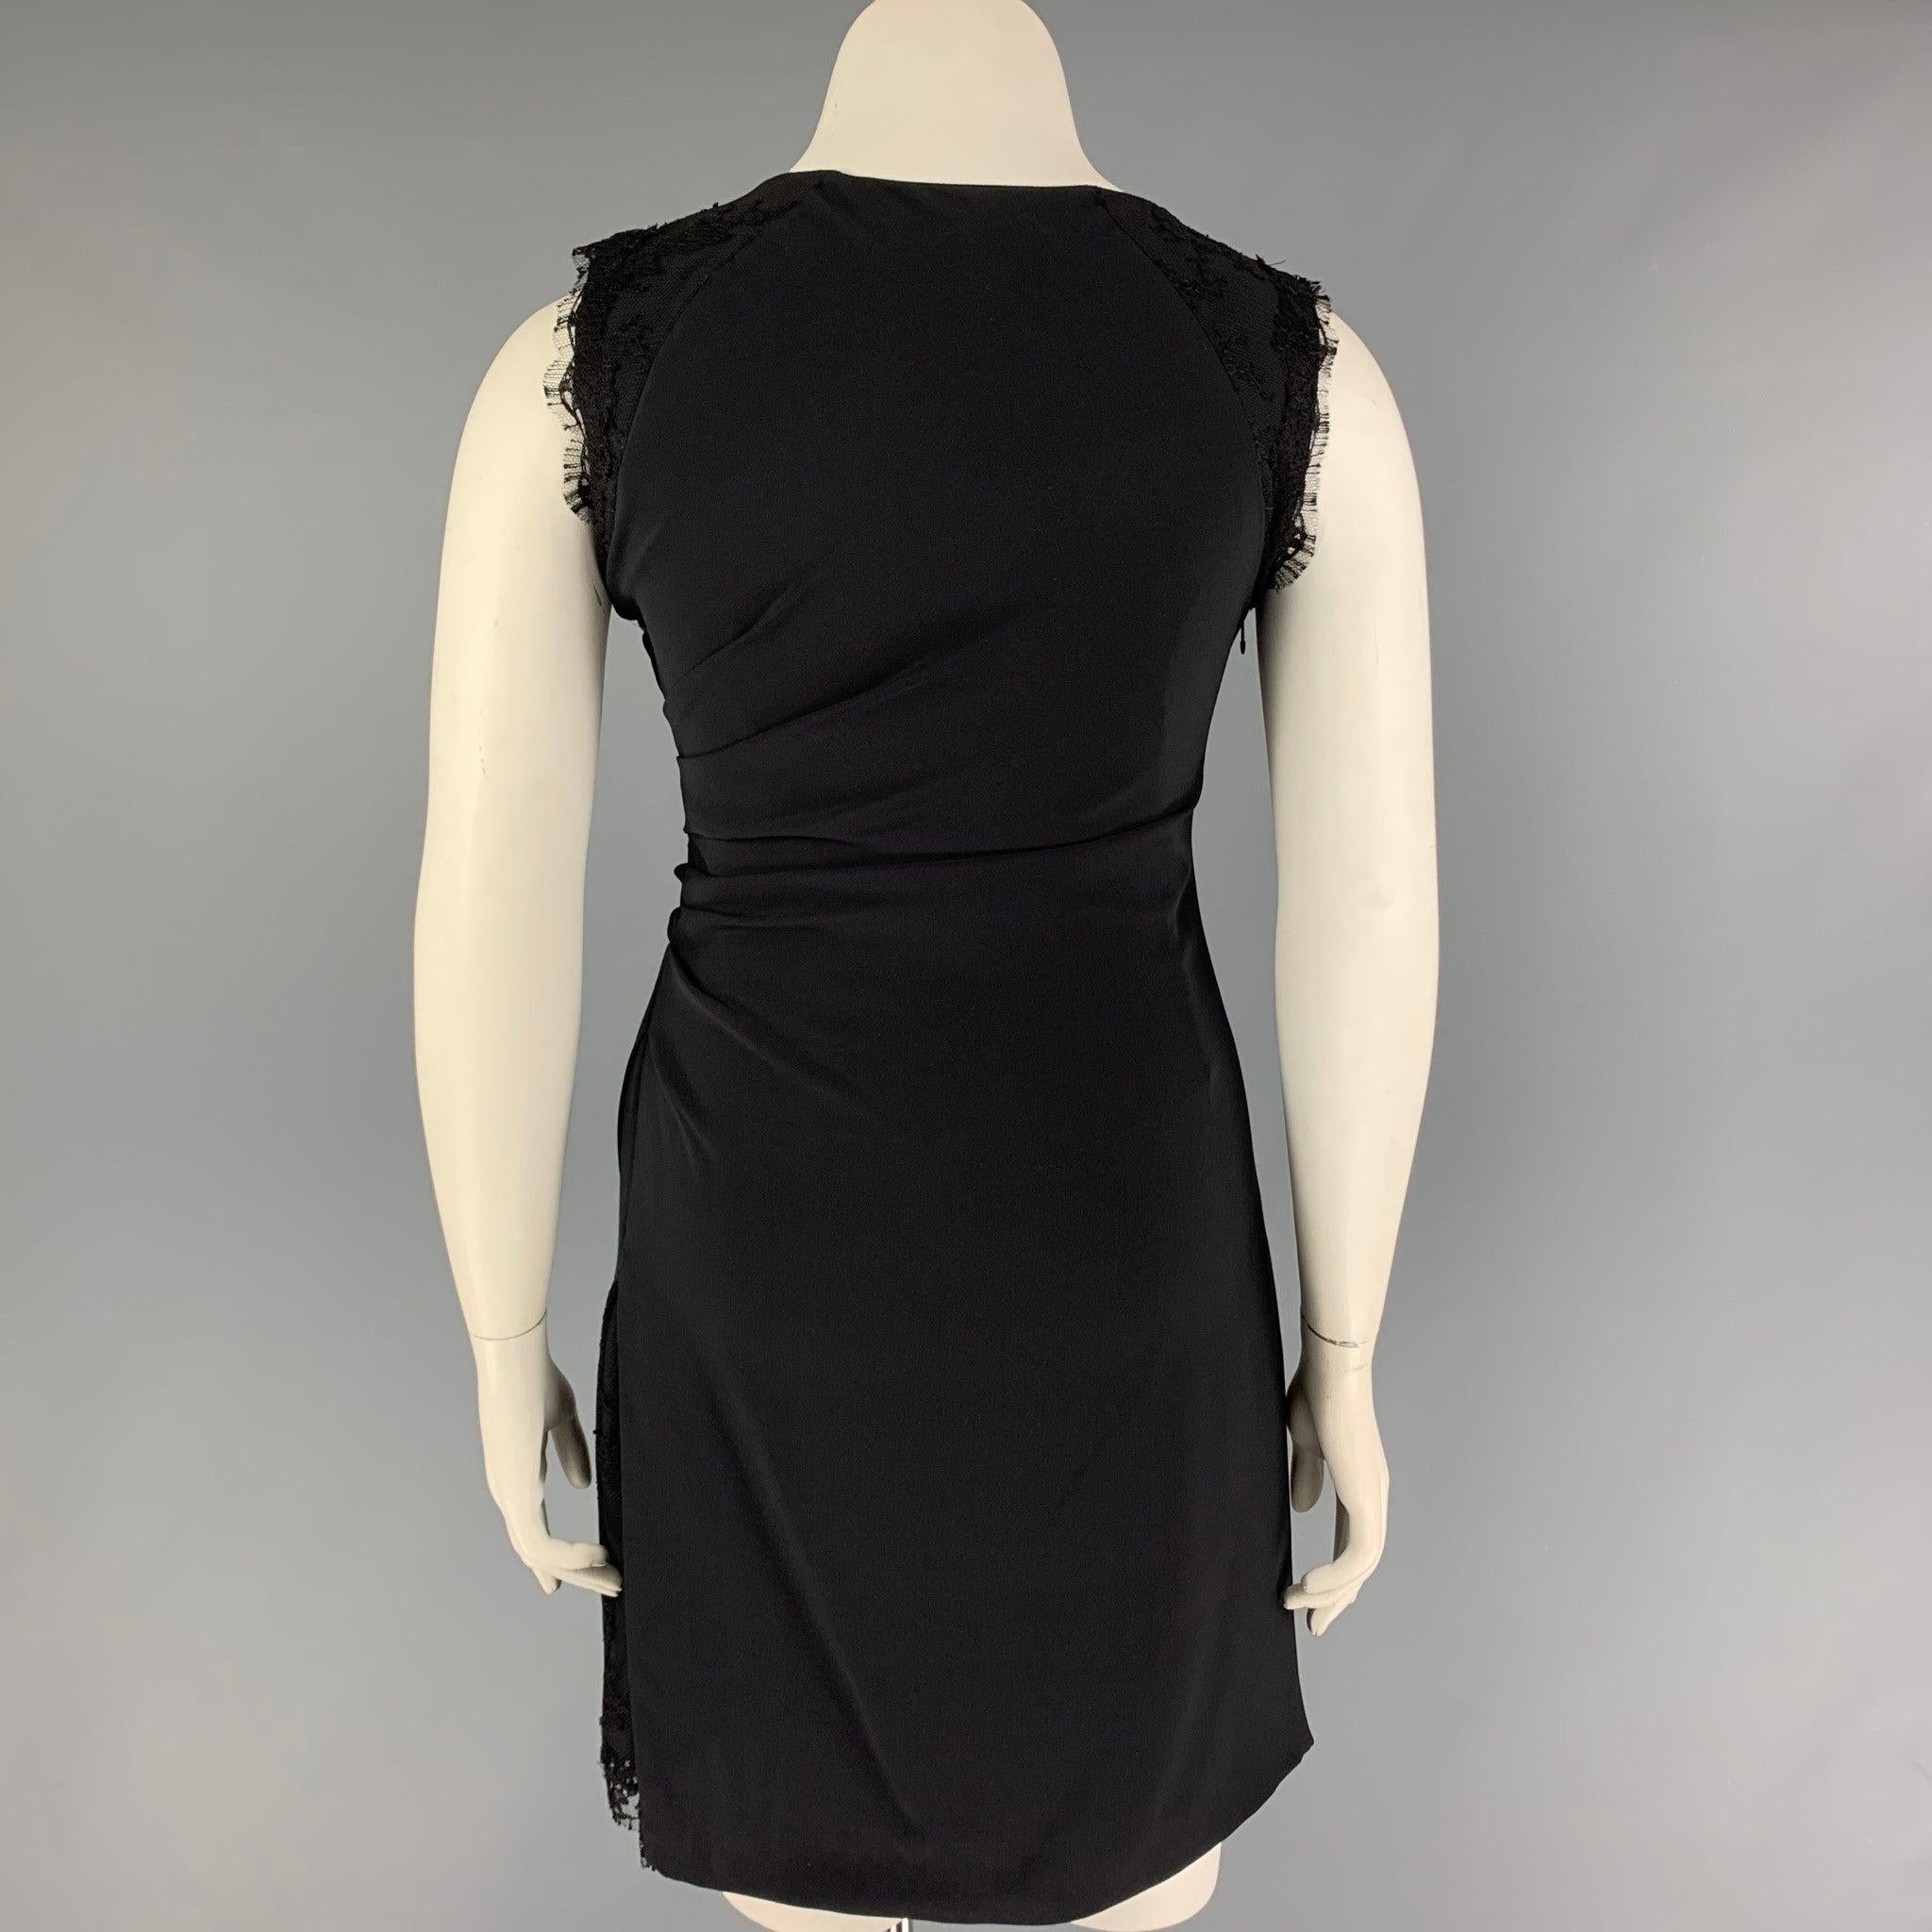 MONIQUE LHUILLIER Size 10 Black Viscose Polyester Shift Dress In Good Condition For Sale In San Francisco, CA